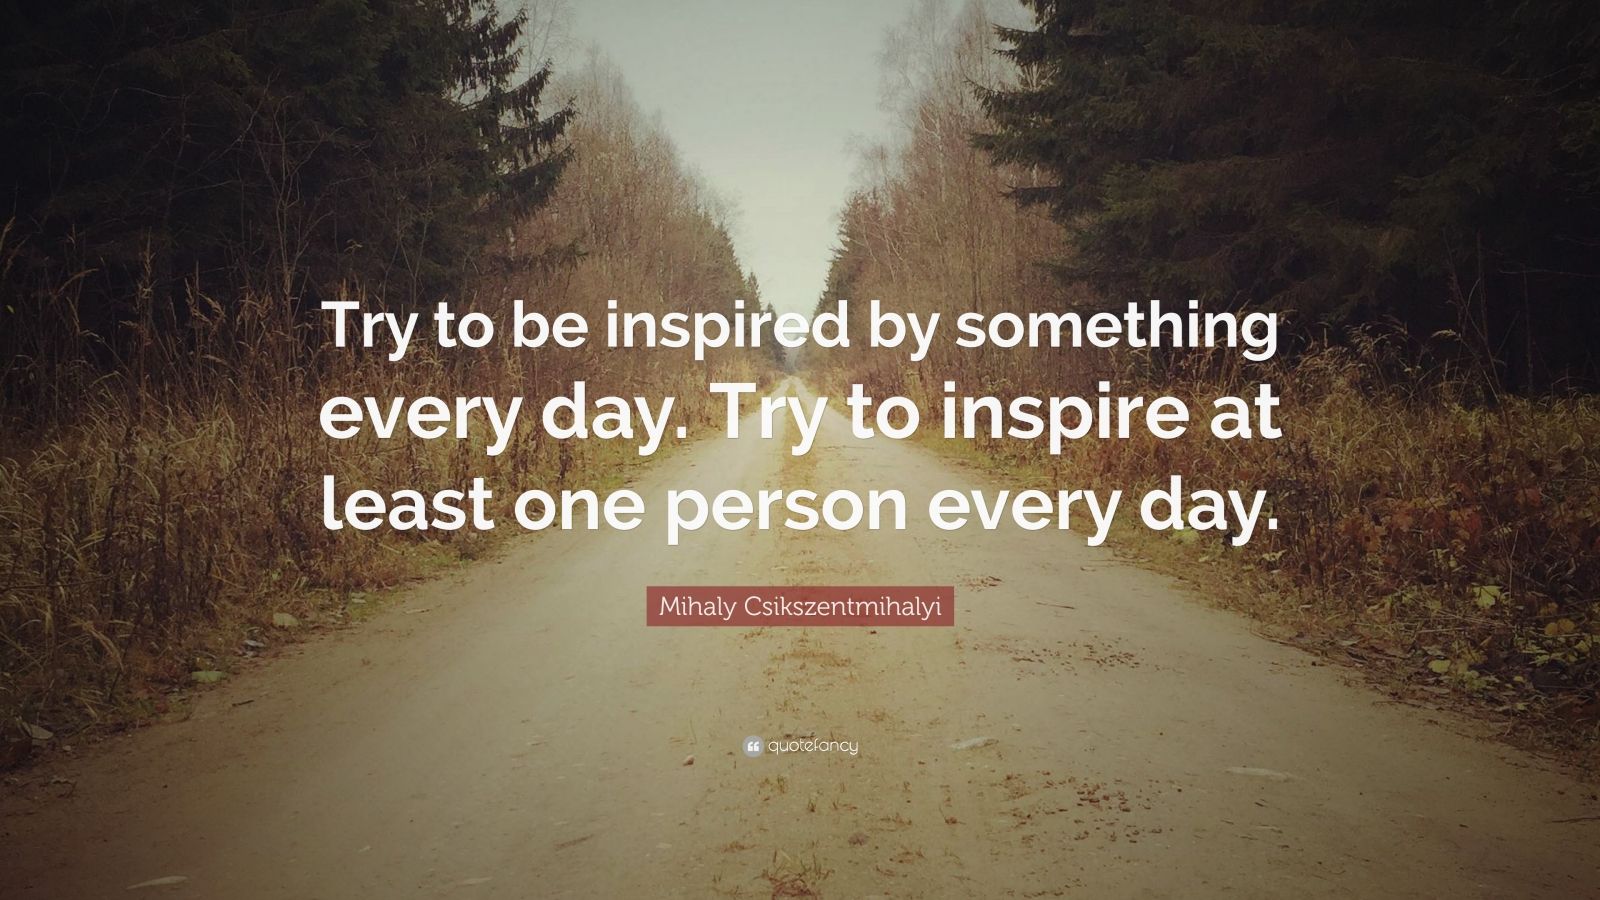 Mihaly Csikszentmihalyi Quote: “Try to be inspired by something every ...